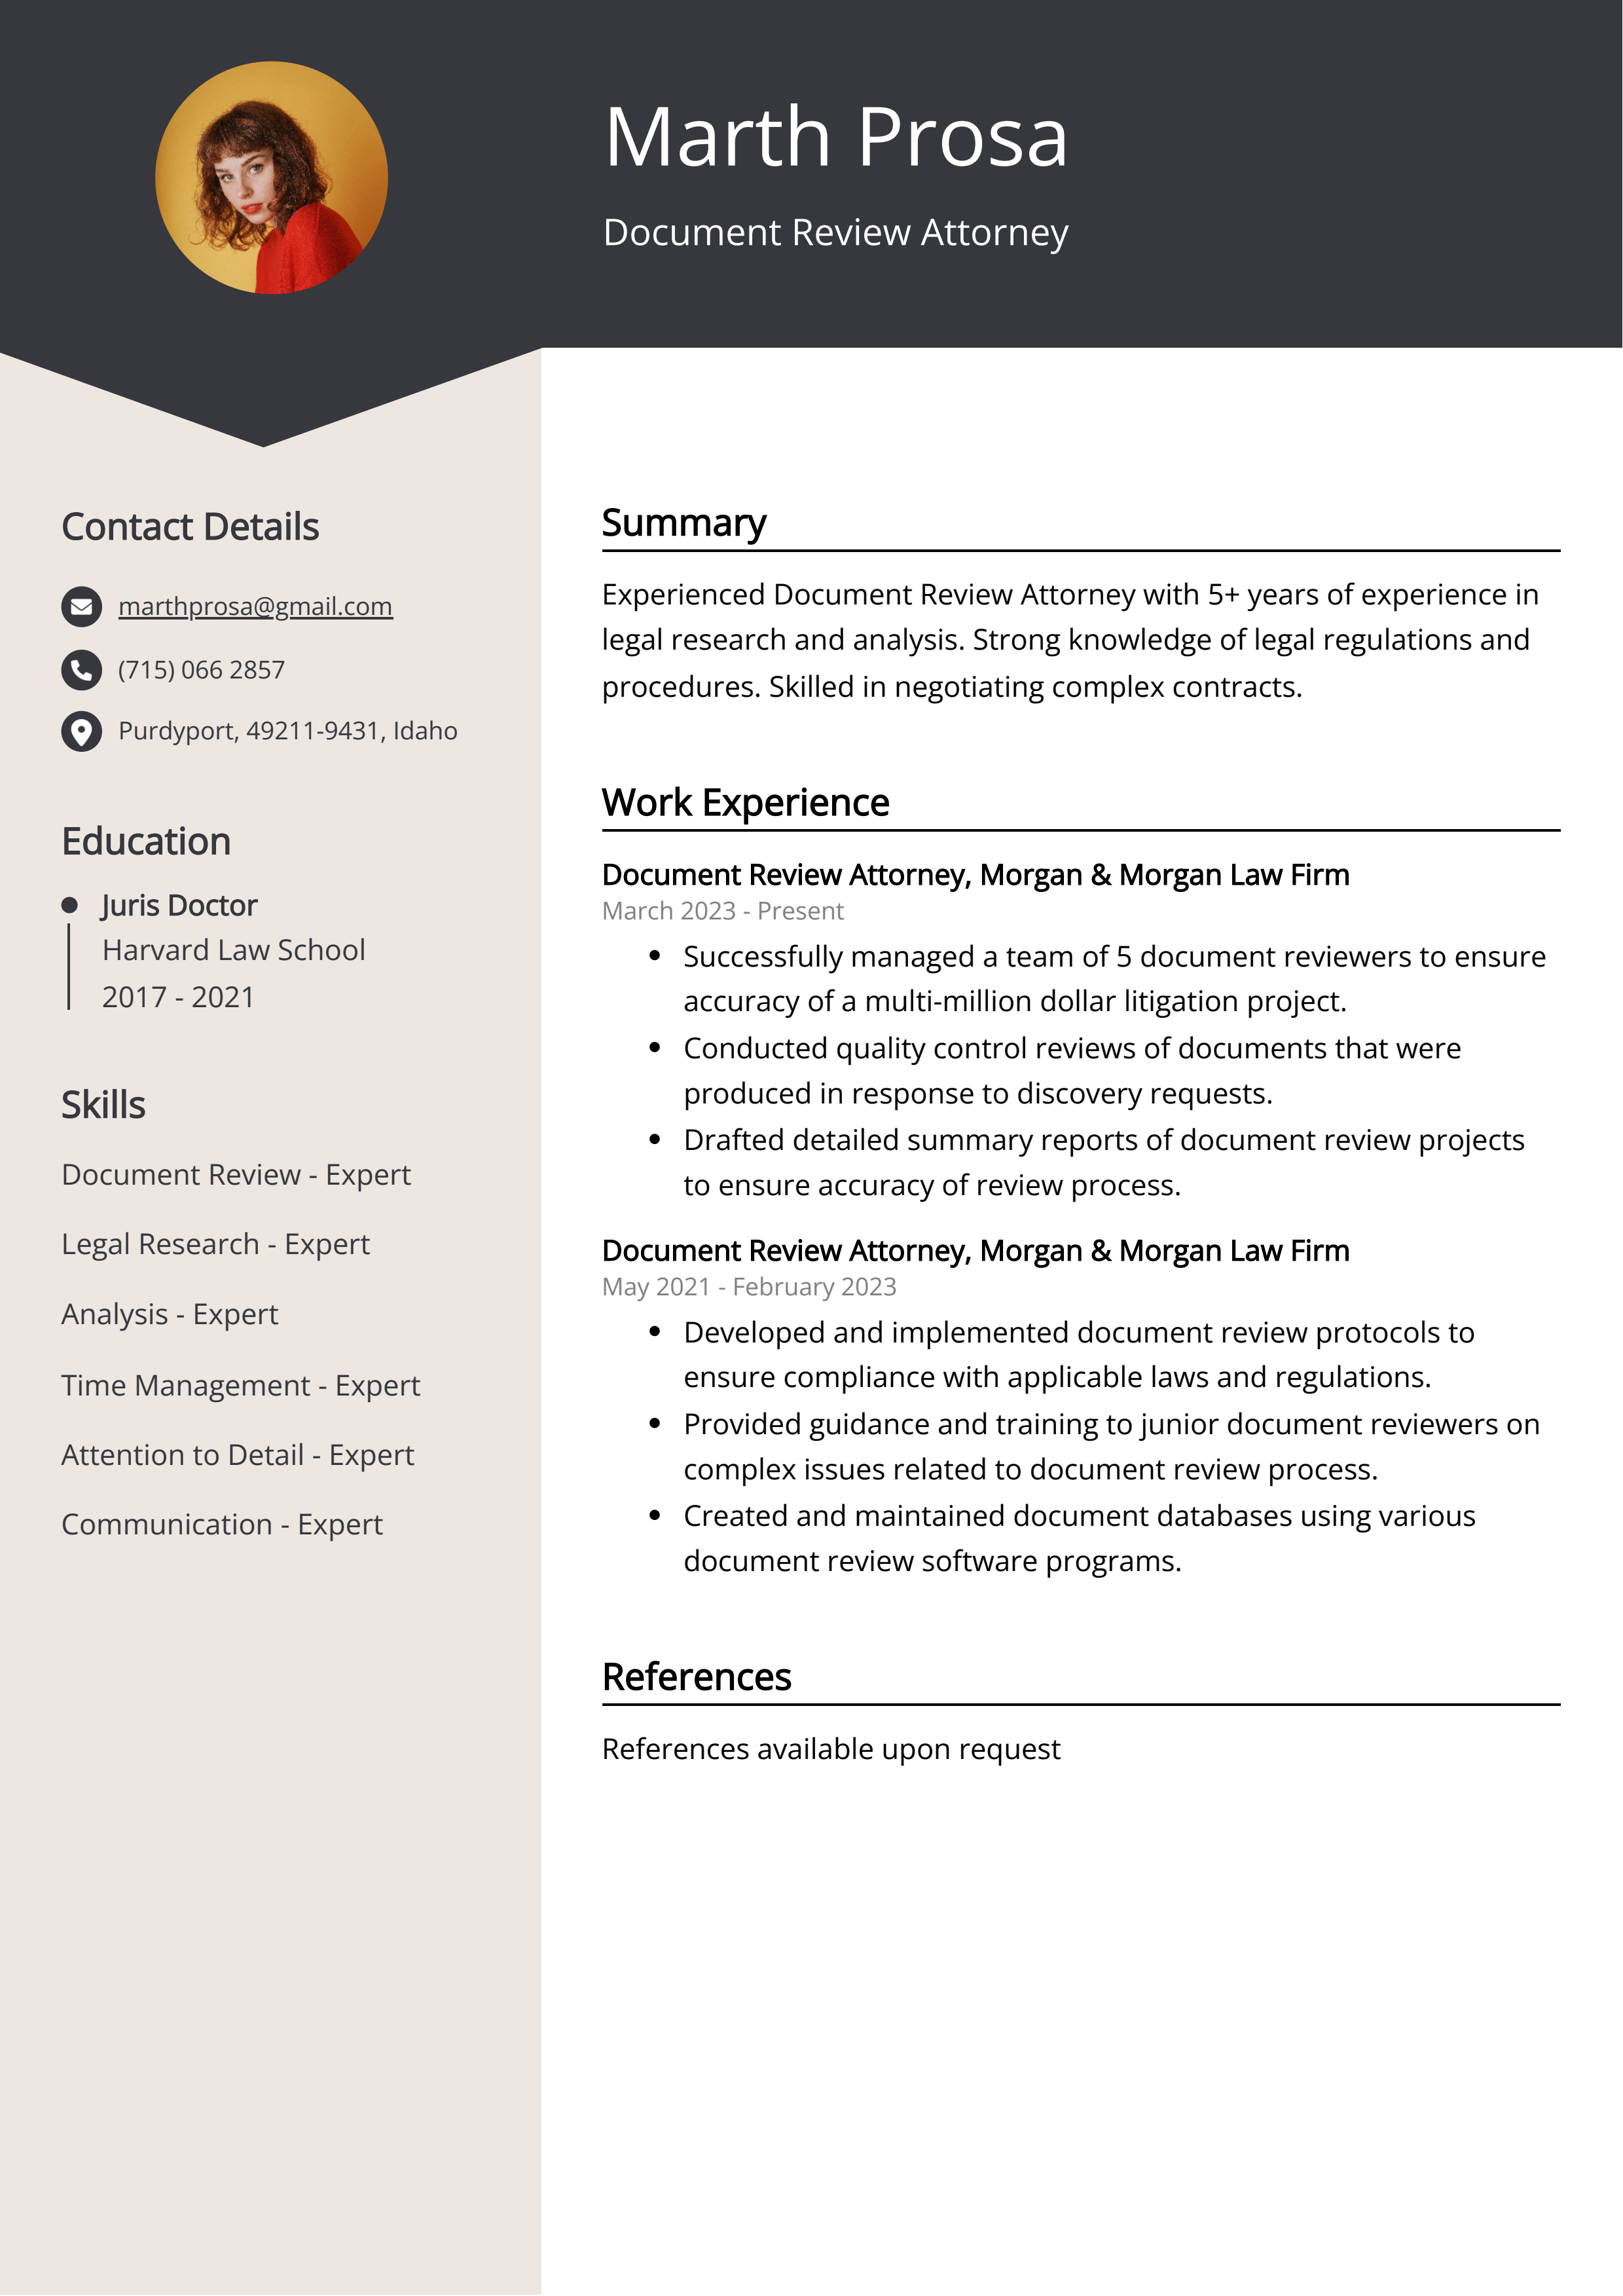 Document Review Attorney CV Example